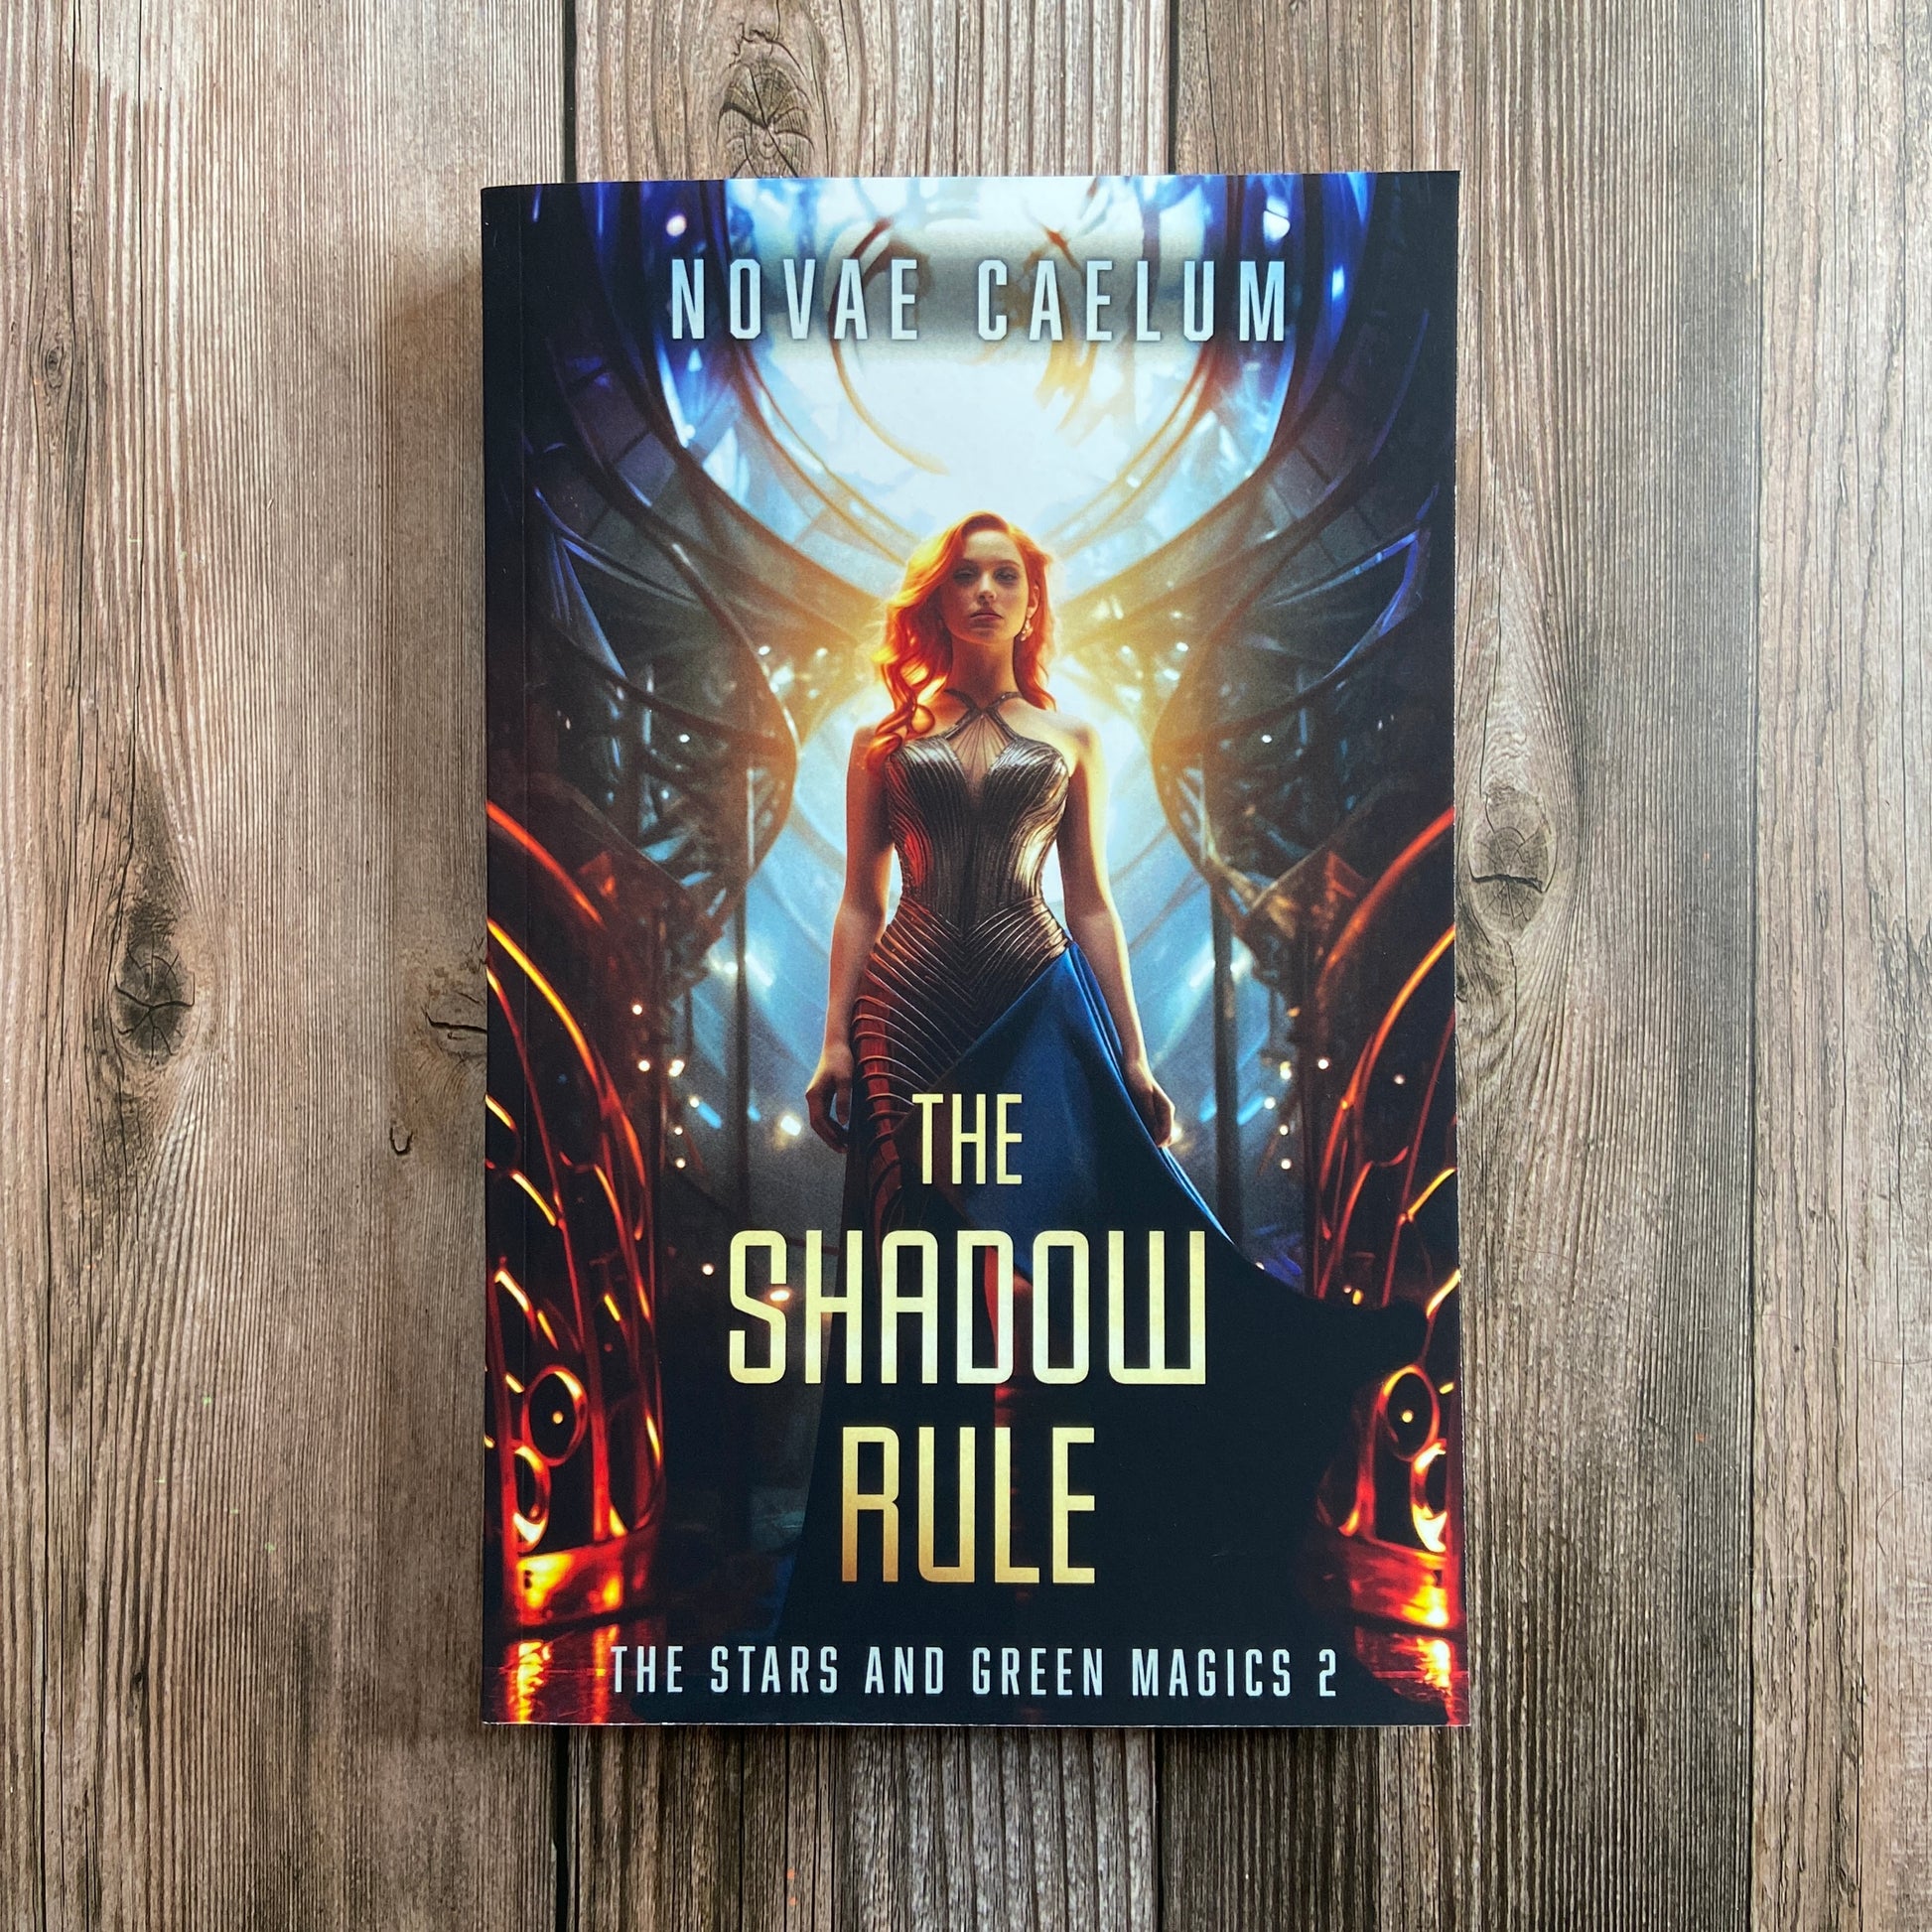 A SIGNED Novae Caelum The Shadow Rule: The Stars and Green Magics Book 2 (Paperback) on a wood surface unveils a mysterious past.